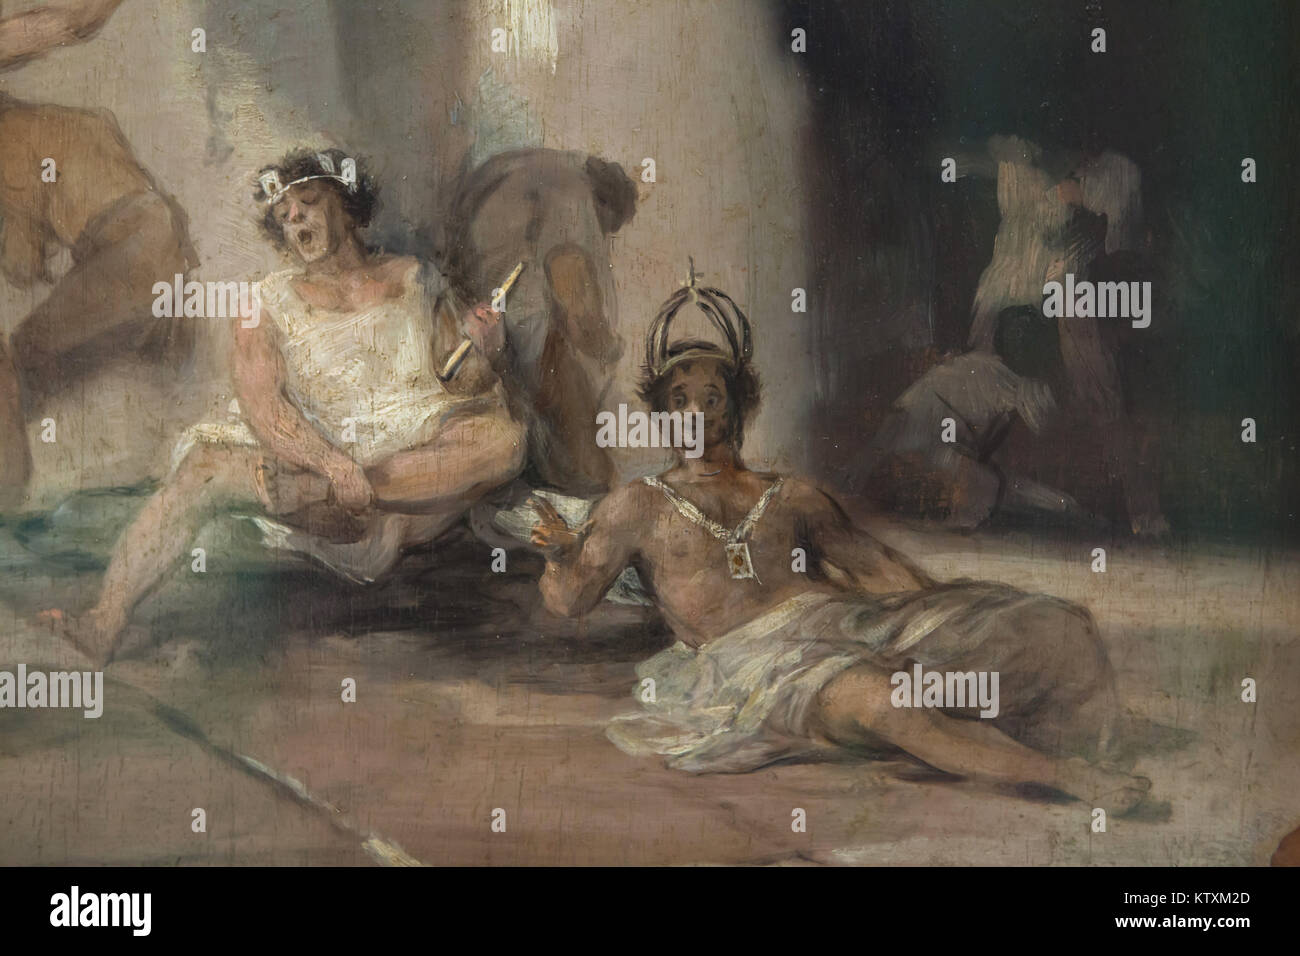 Mentally ill persons depicted in the detail of the painting 'The Madhouse' by Spanish painter Francisco Goya (ca. 1812-1819) on display in the Real Academia de Bellas Artes de San Fernando (Royal Academy of Fine Arts of San Fernando) in Madrid, Spain. Stock Photo